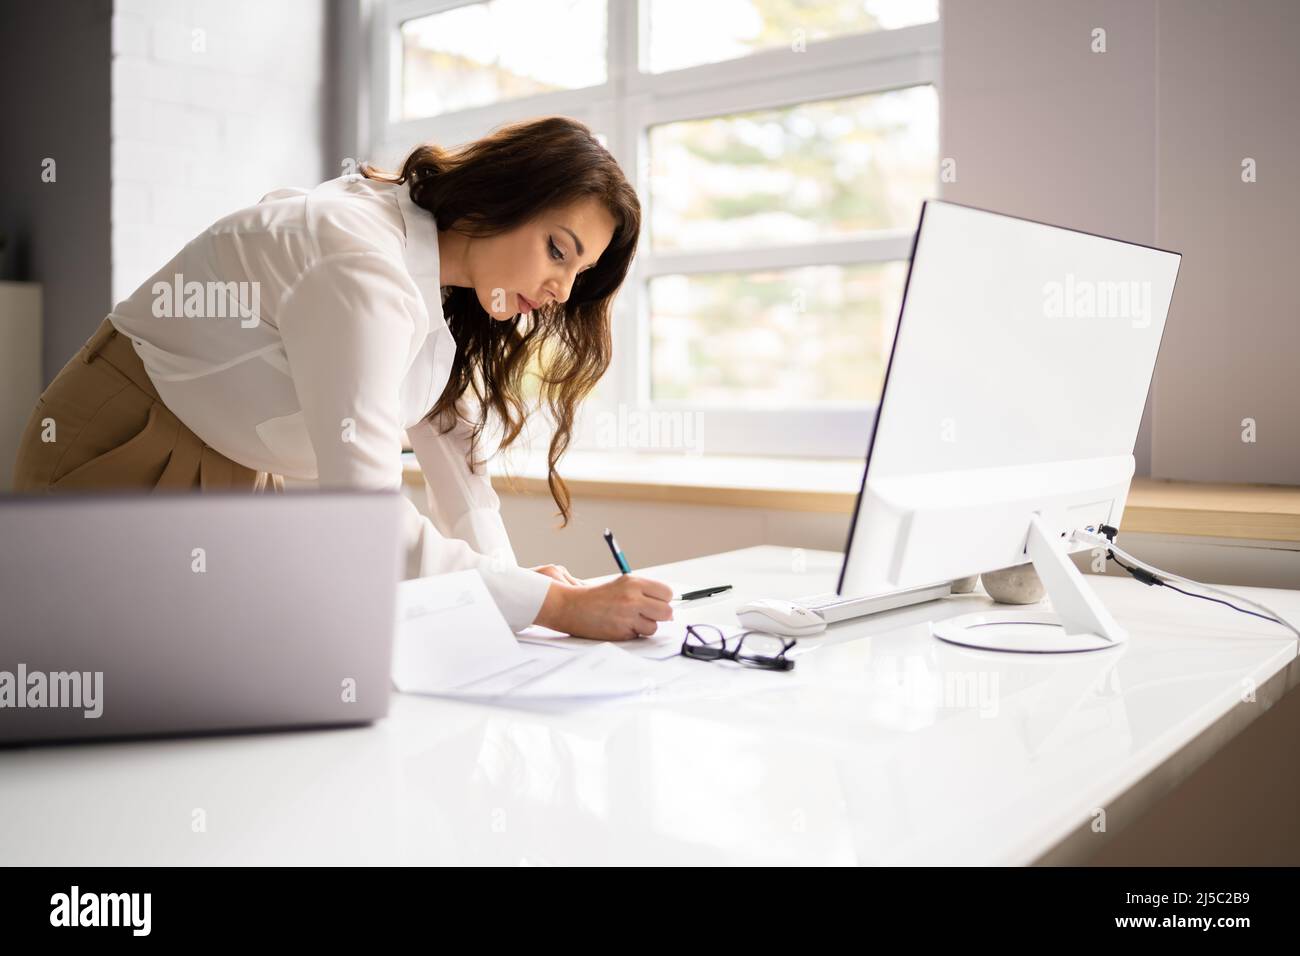 Accountant Woman Using Office Computer To Calculate Invoice Stock Photo ...